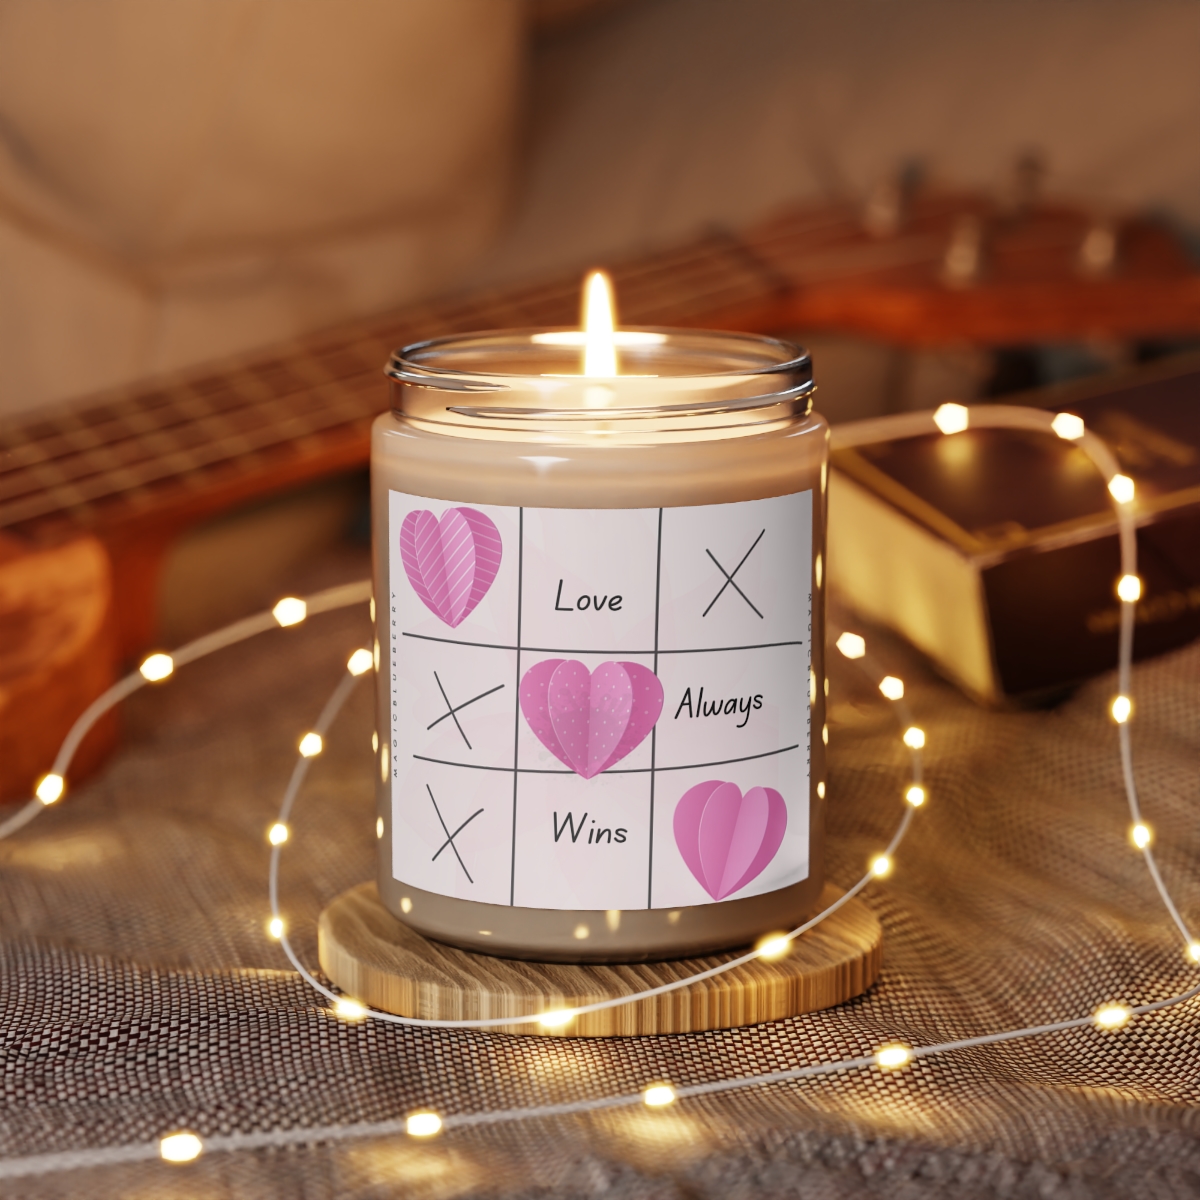 Love Always Wins - Scented Soy Wax Candle | Clear Jar | Vegan Cinnamon Stick Candle Jar | Coconut Soy Candle 9oz | Aromatherapy product thumbnail image